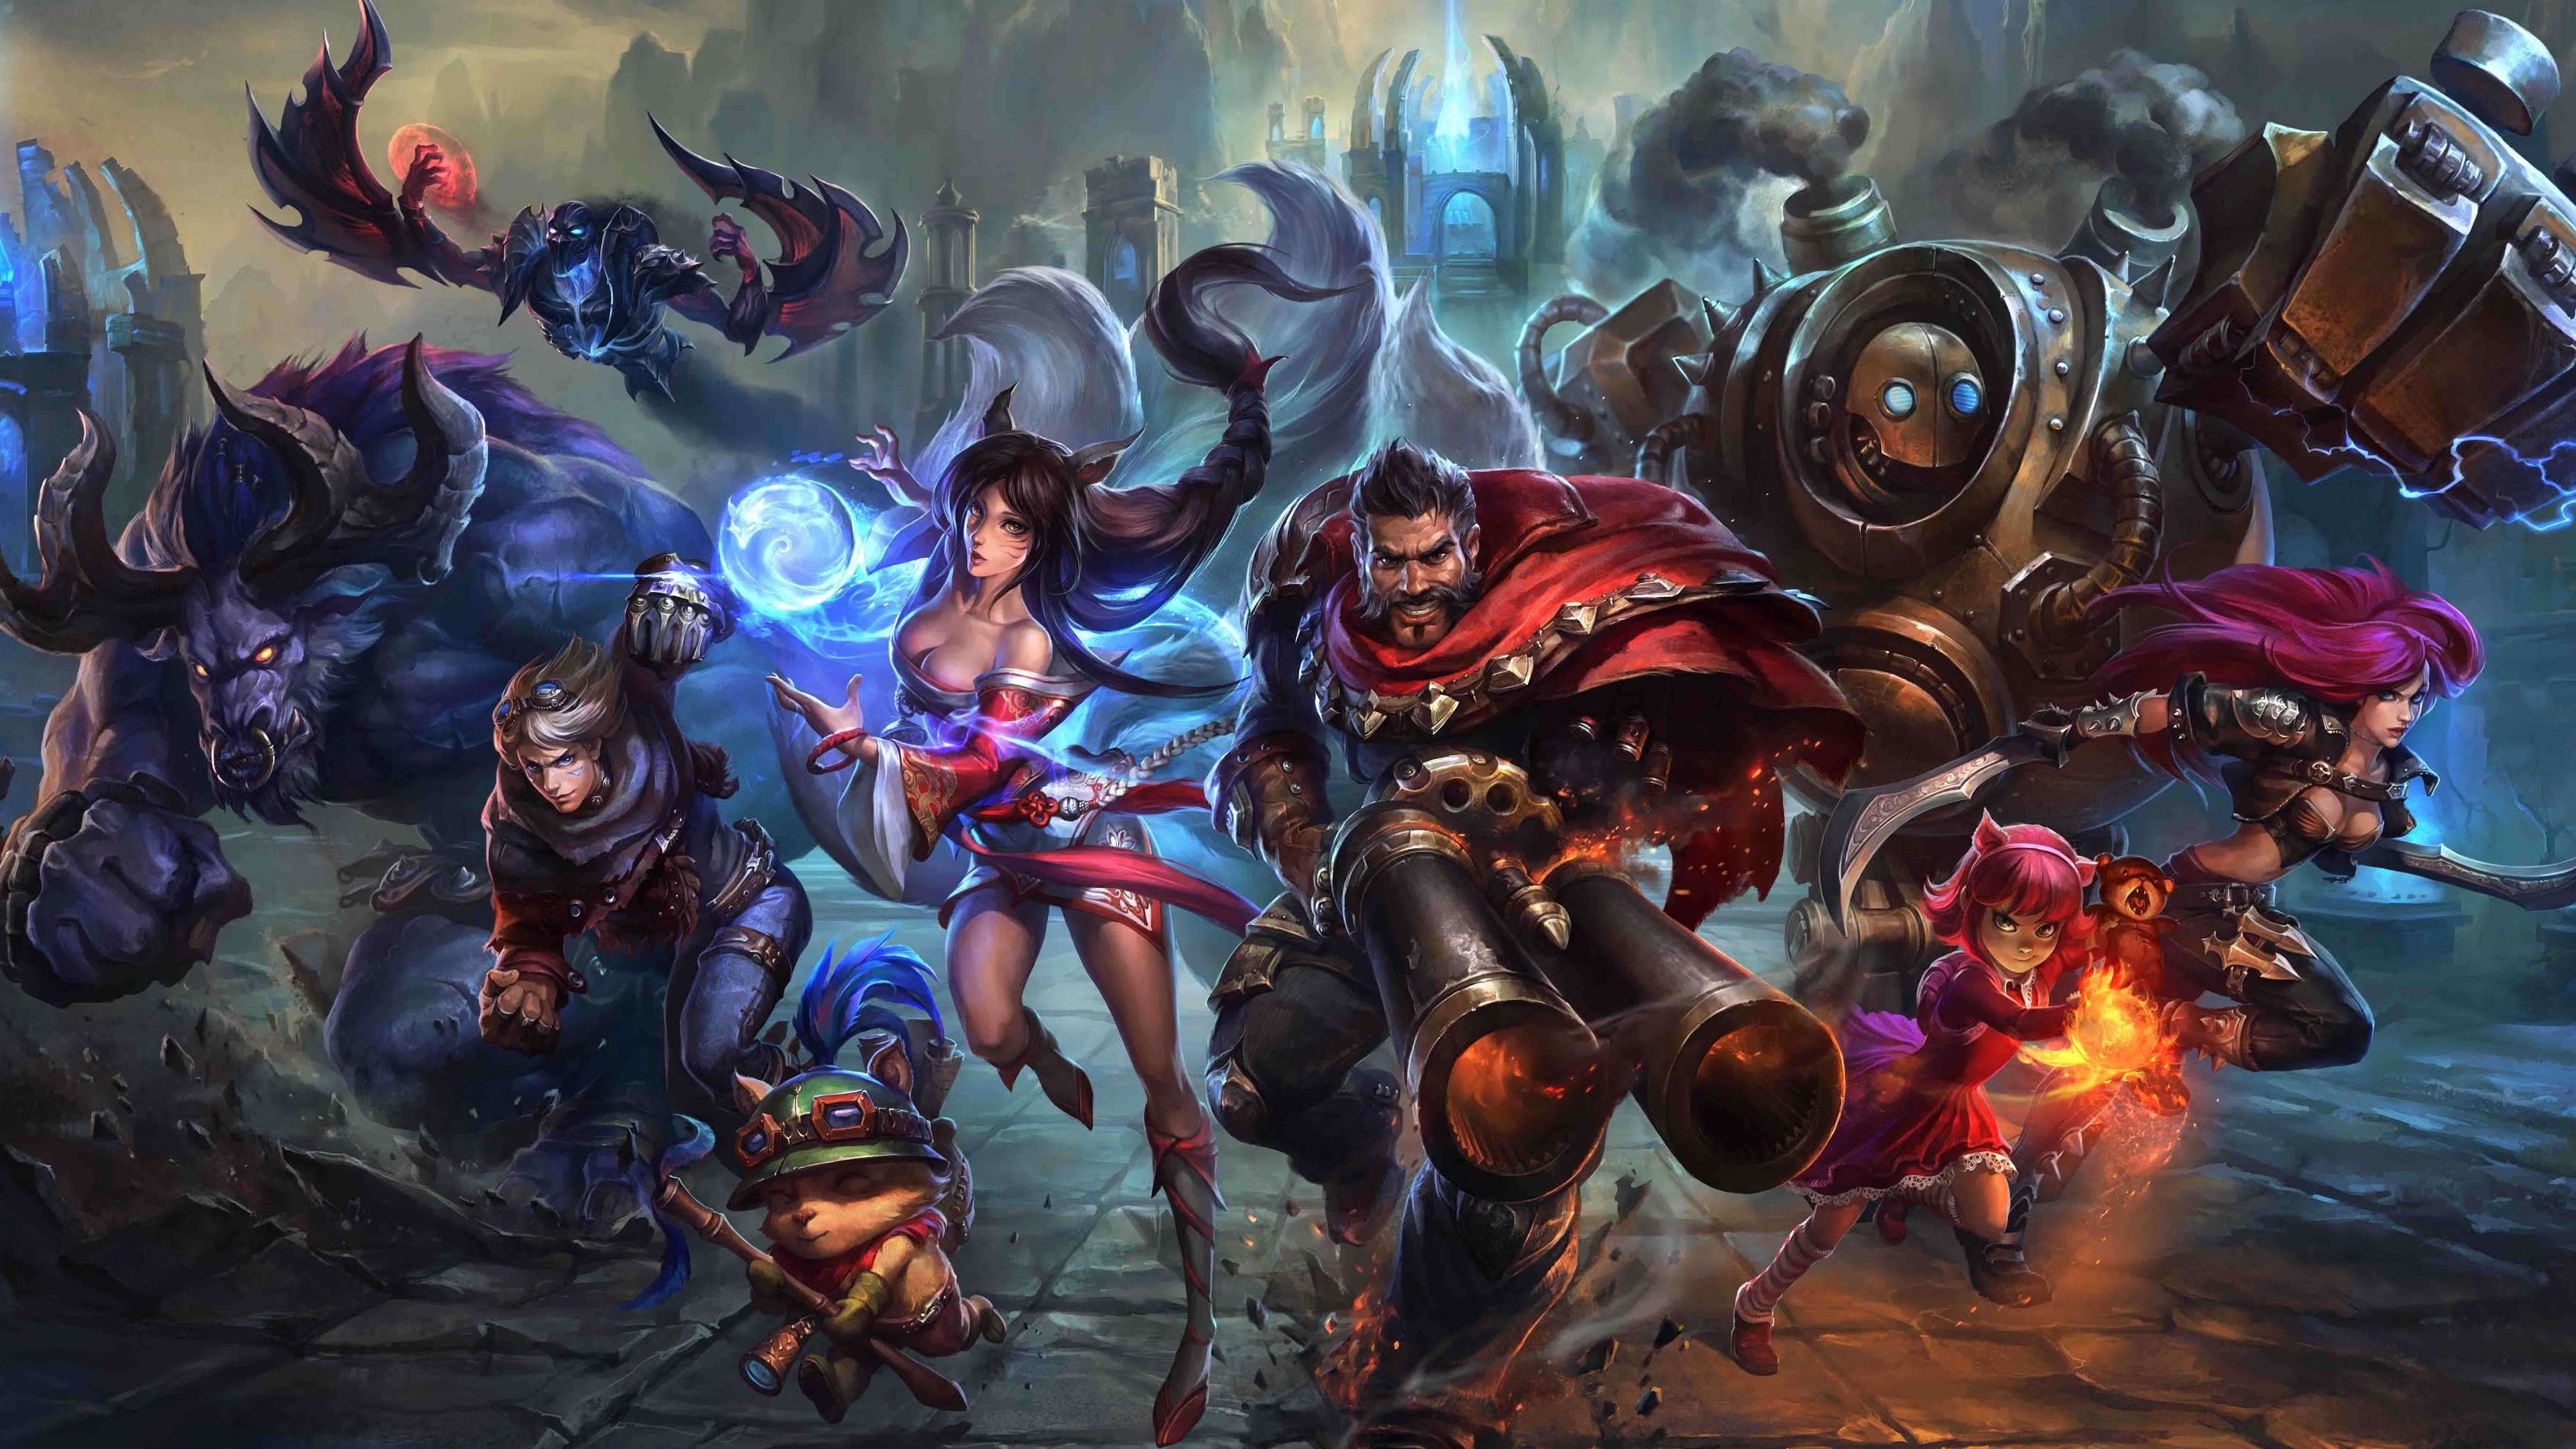 How to play League of Legends – a LoL beginner’s guide | PCGamesN